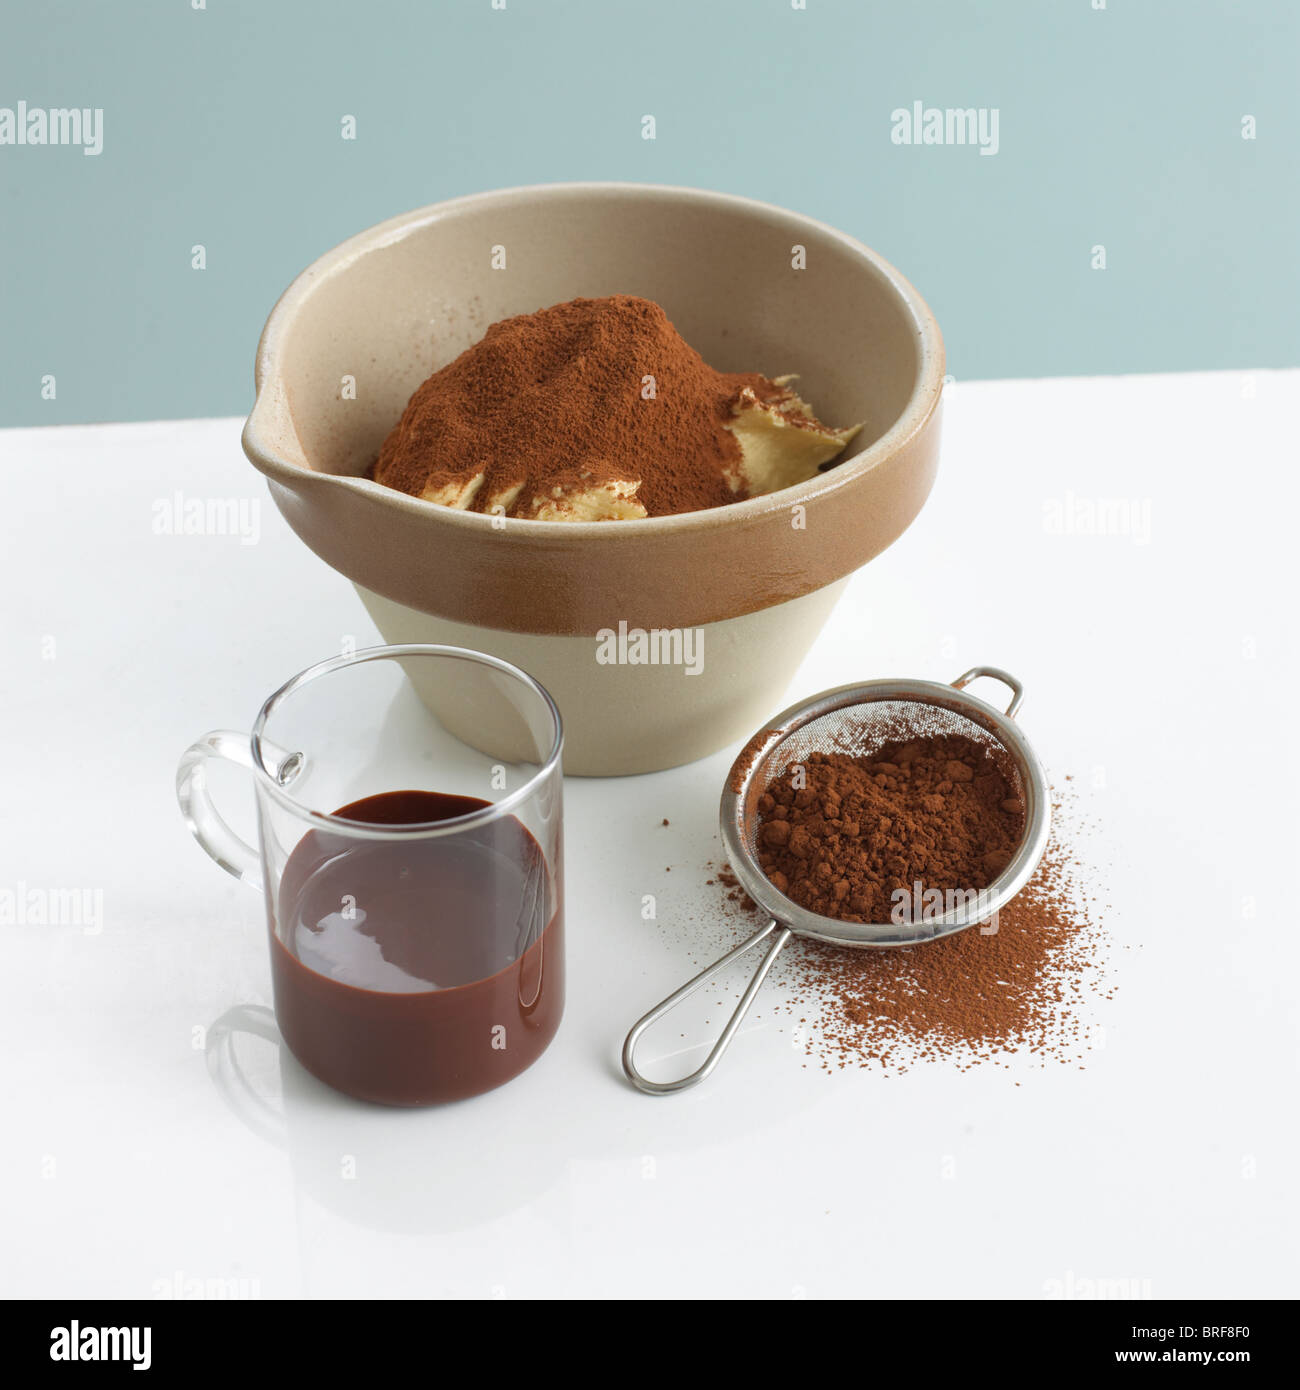 Pudding bowl with butter and cocoa powder next to glass of melted chocolate and sieve of chocolate powder Stock Photo